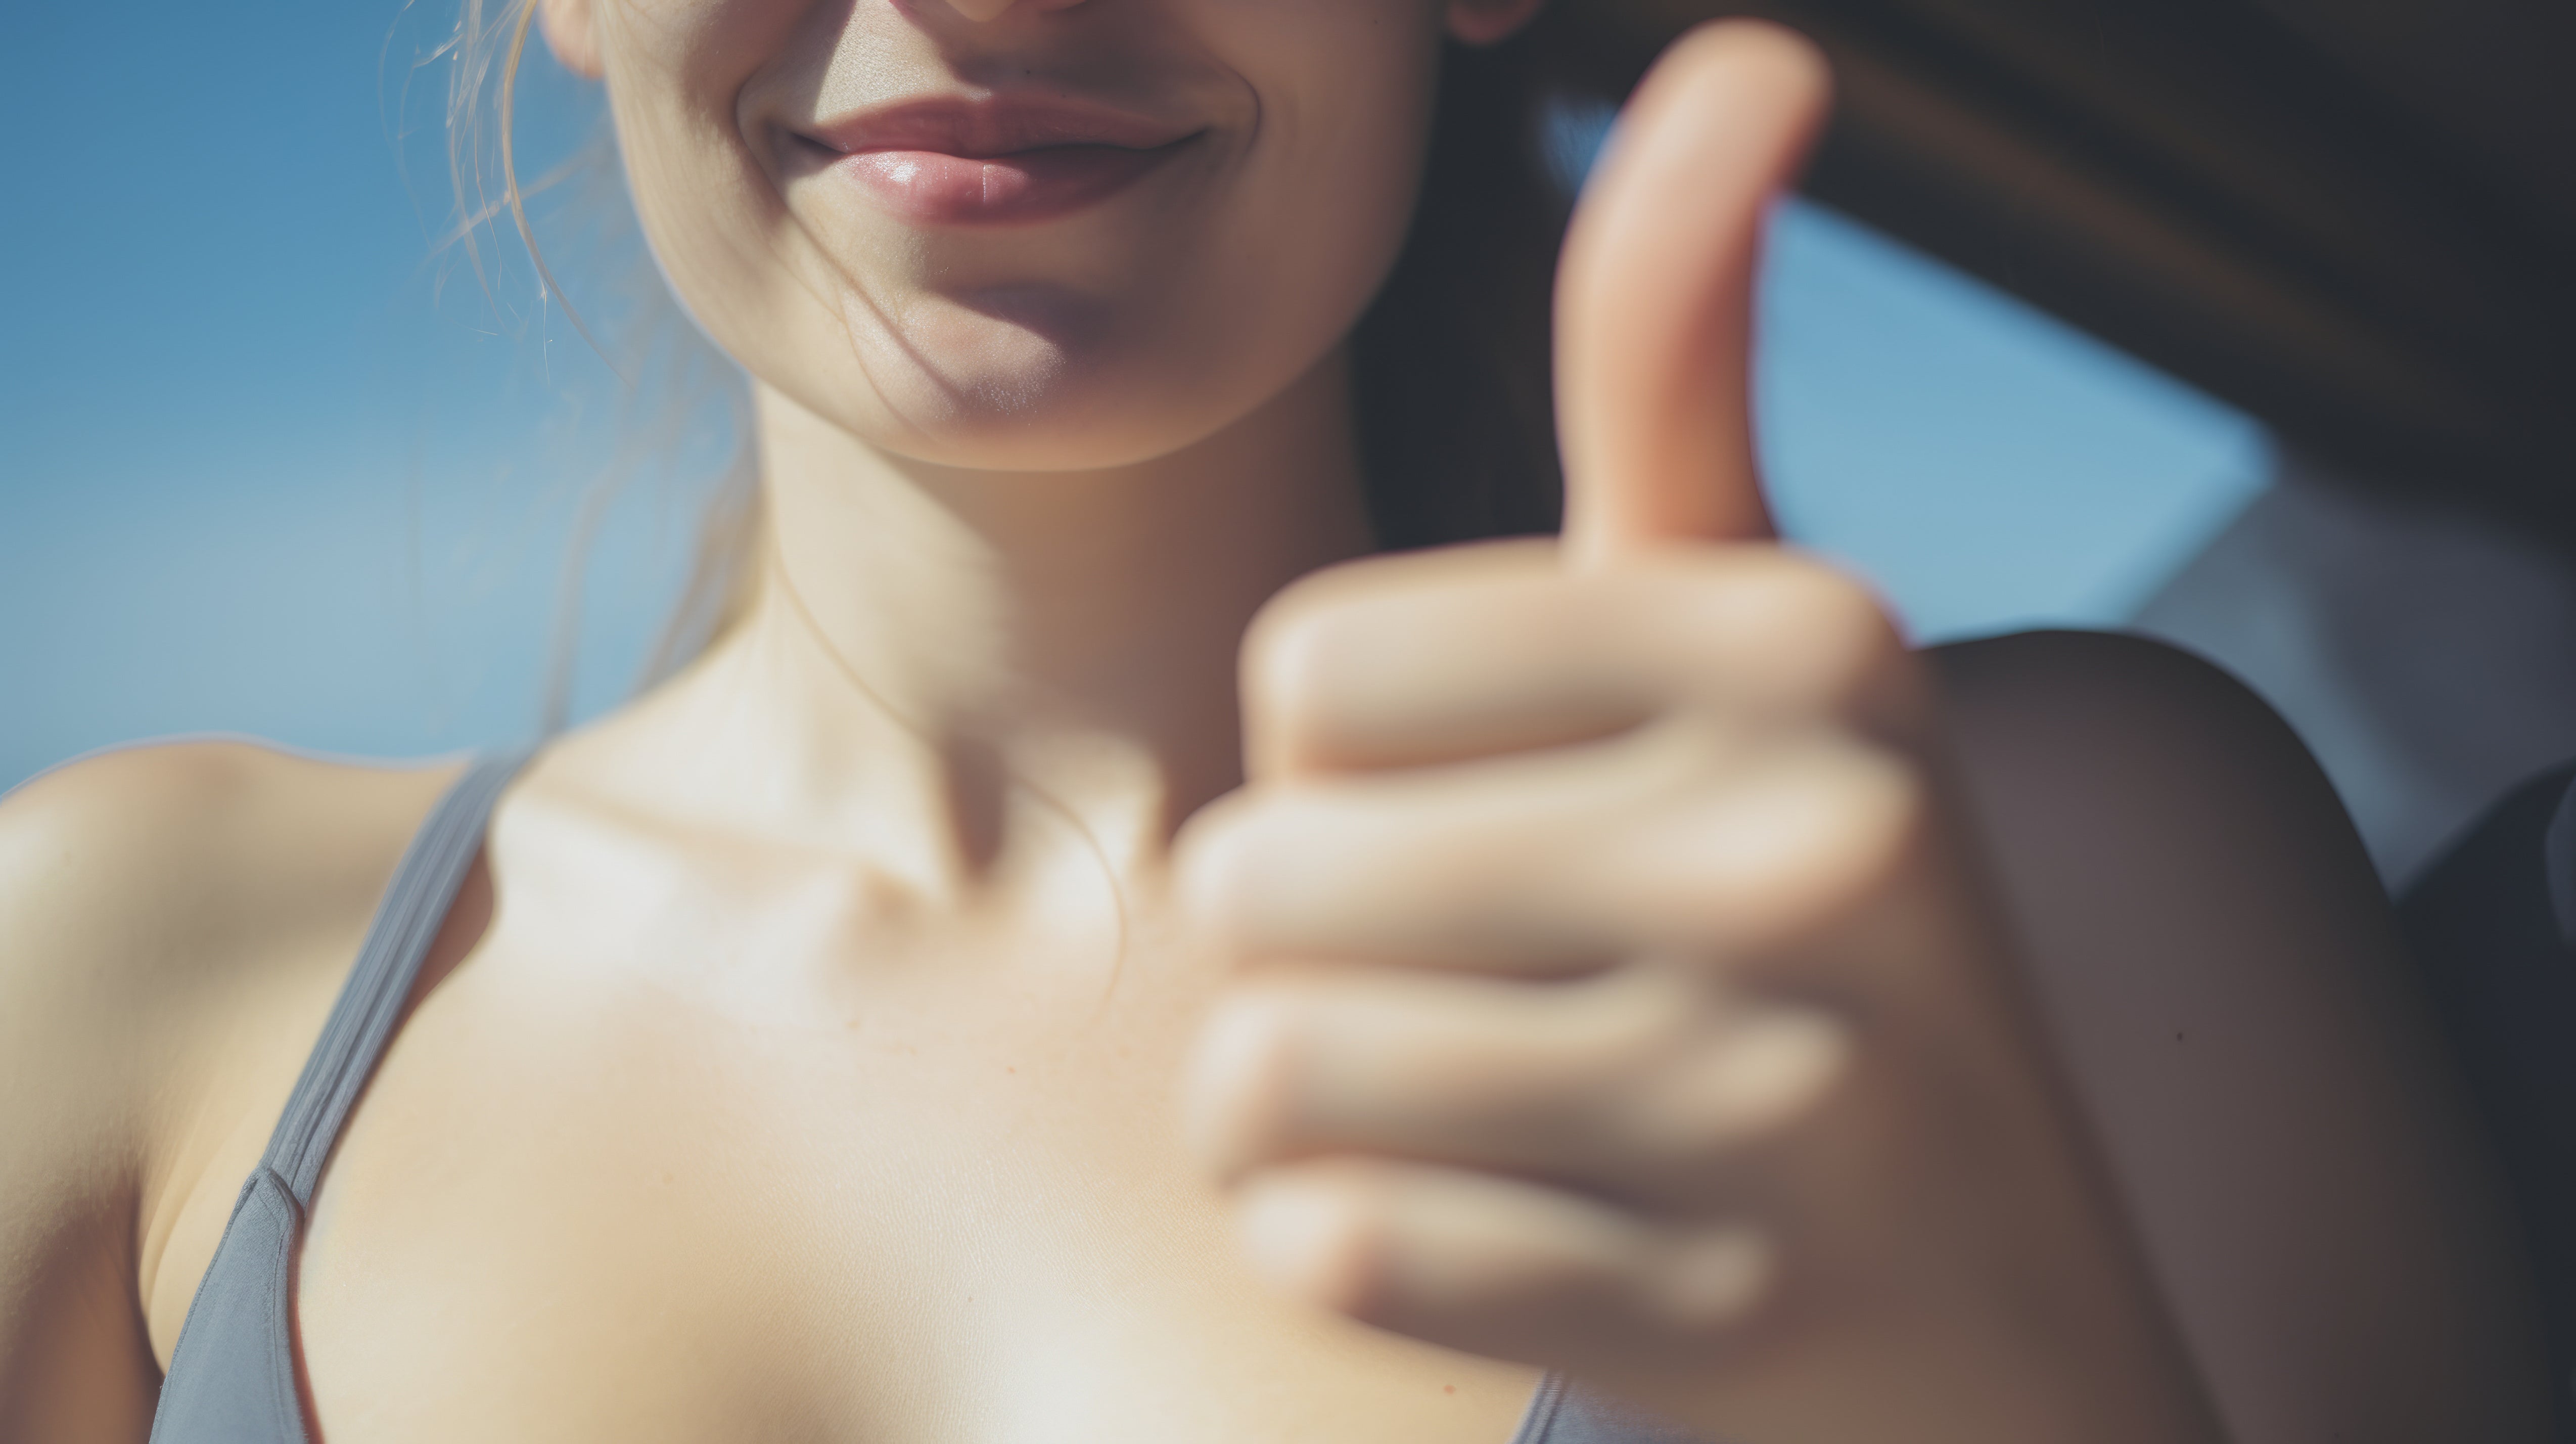 A young woman smiling and giving a thumbs up sign to show she is happy and content.